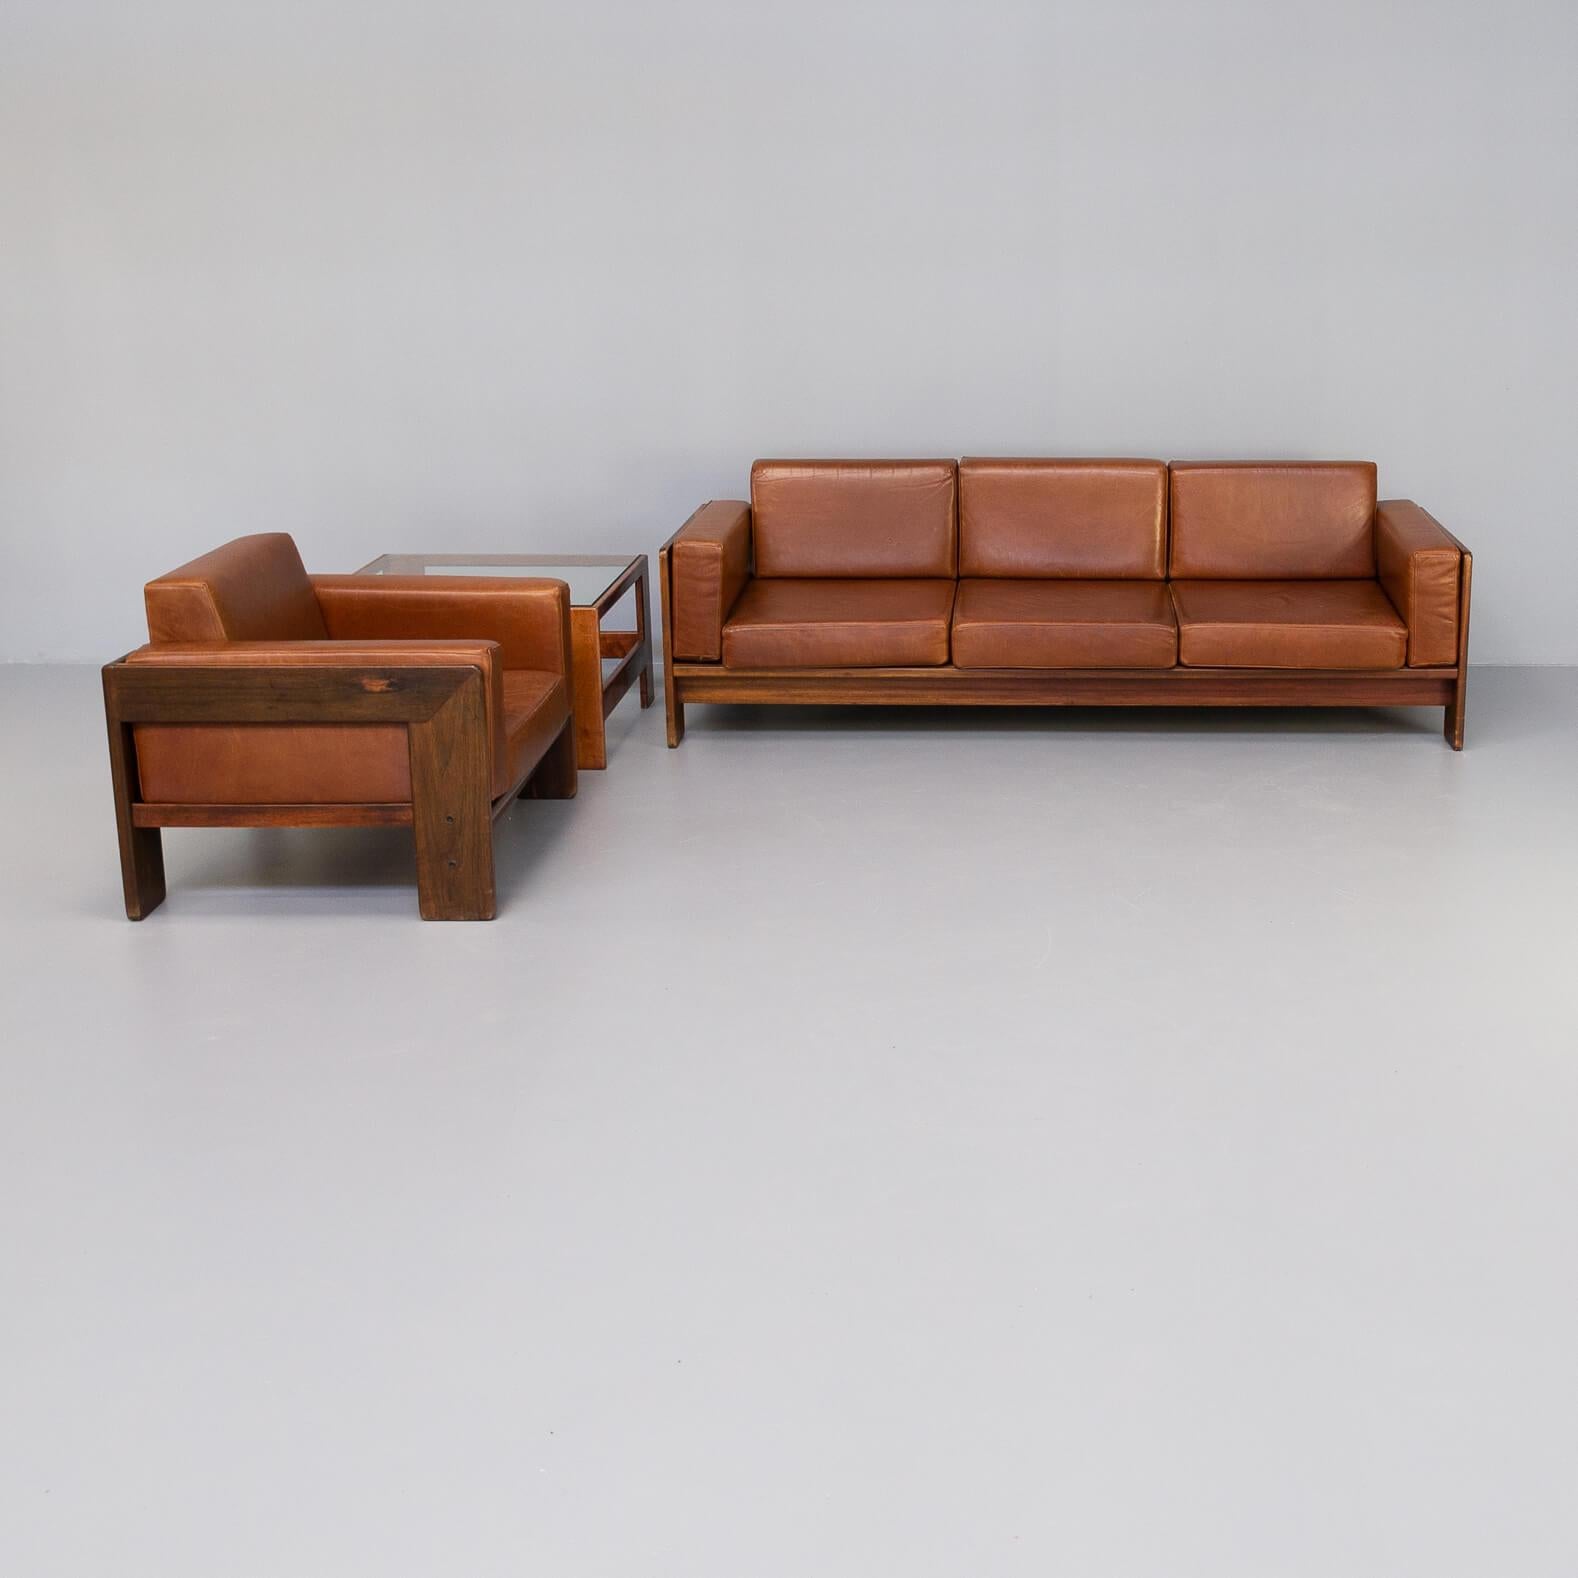 Beautiful Bastiano sofa made with a wooden frame and cognac brown leather cushions. Tobia Scarpa designed the Bastiano series for the experimental design laboratory of Gavina in 1960. About the result Gavina said it “exploited Le Corbusier’s idea of